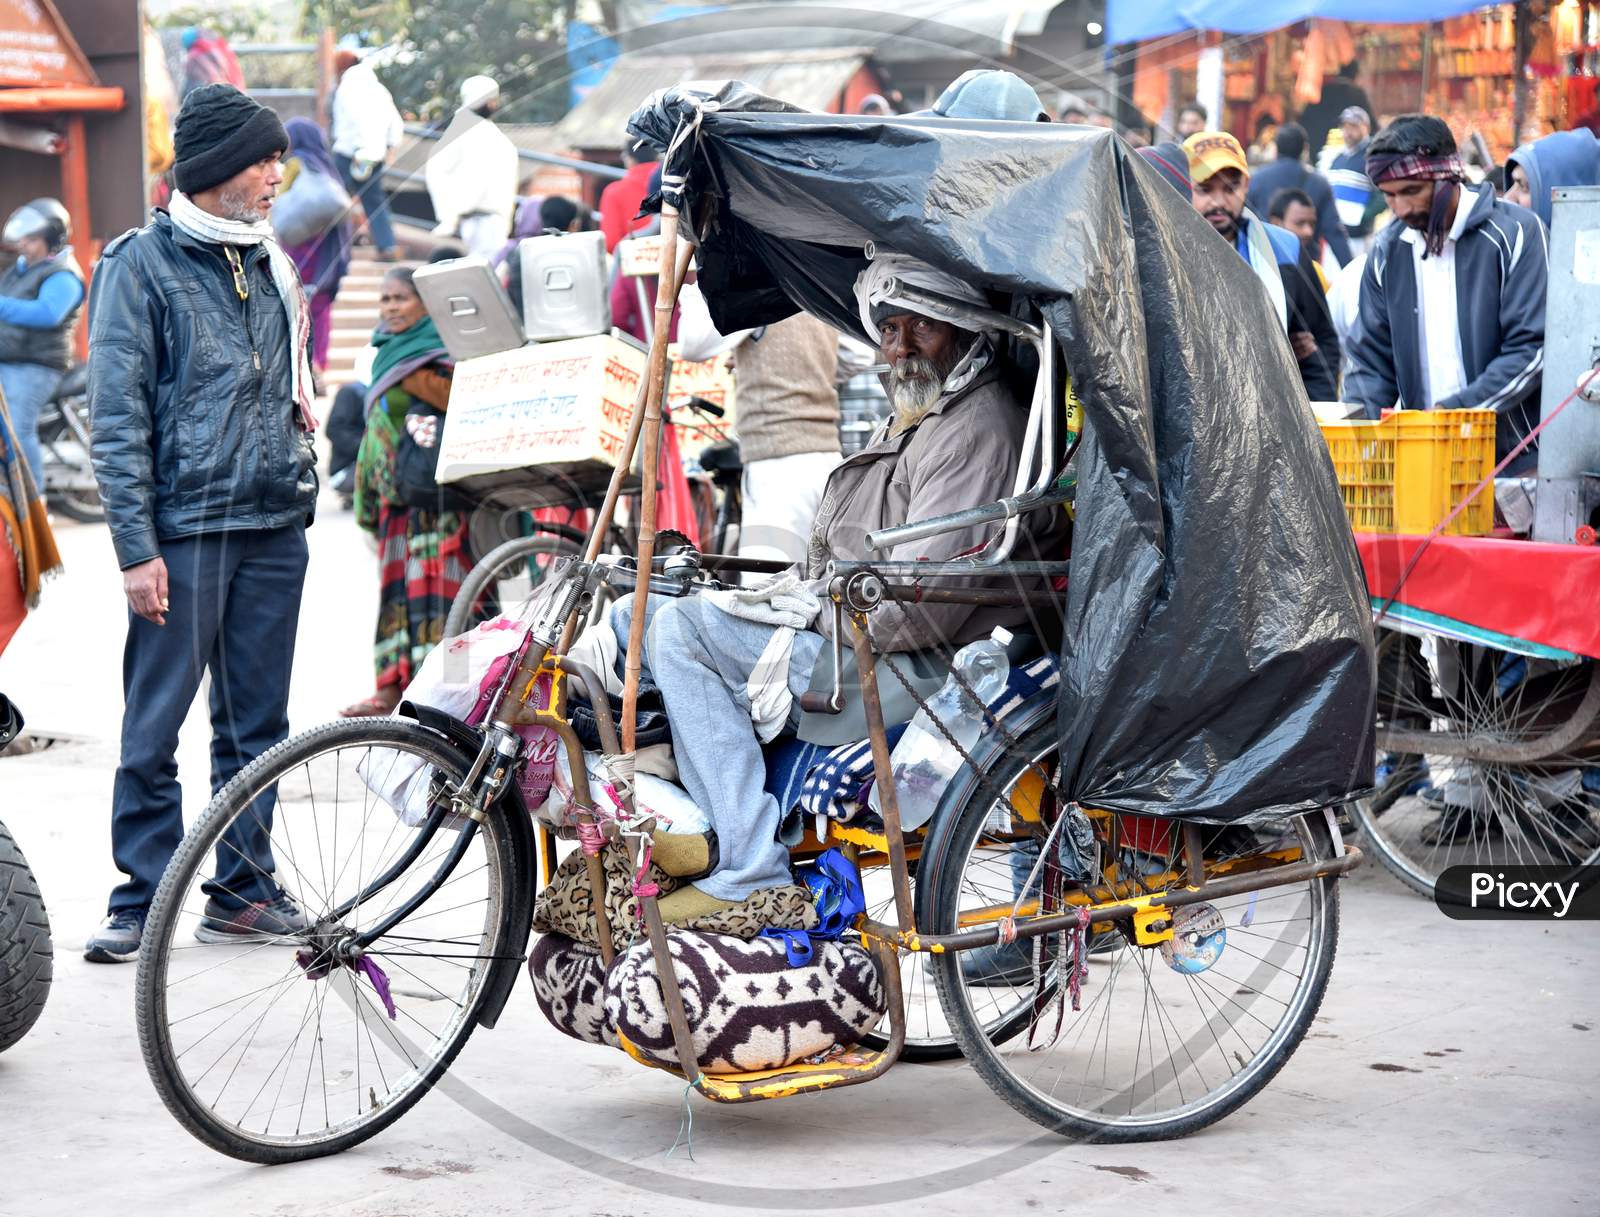 A Poor Man Or Physically Handicapped Man On an Tricycle And Begging